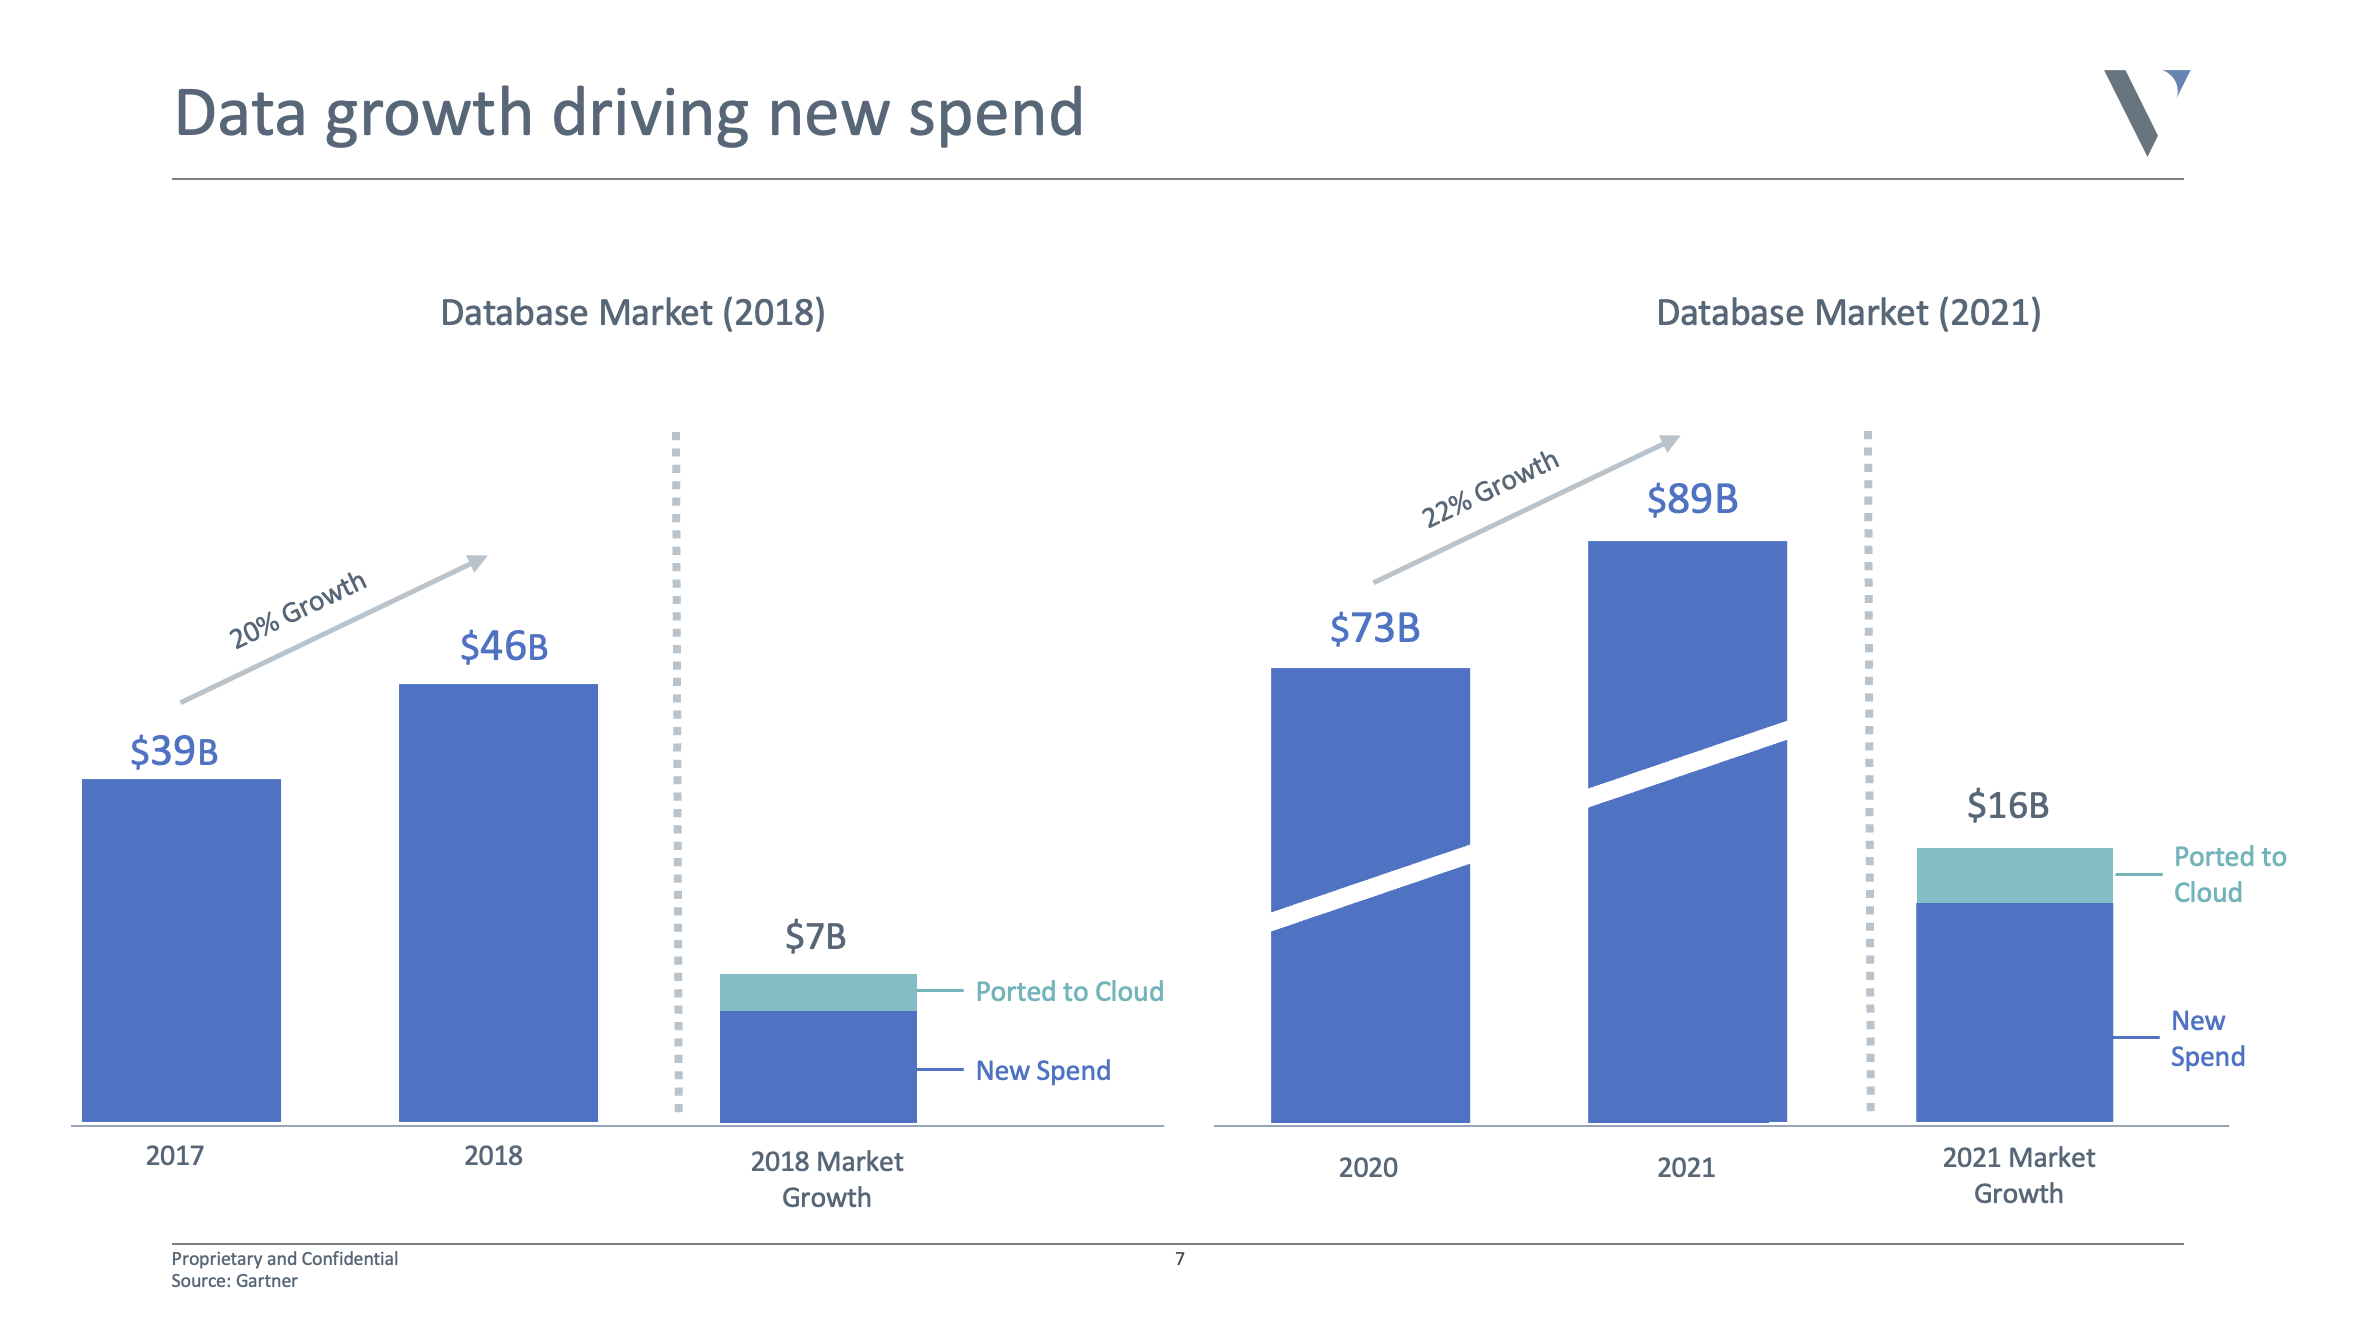 Database growth is driving spend in the enterprise